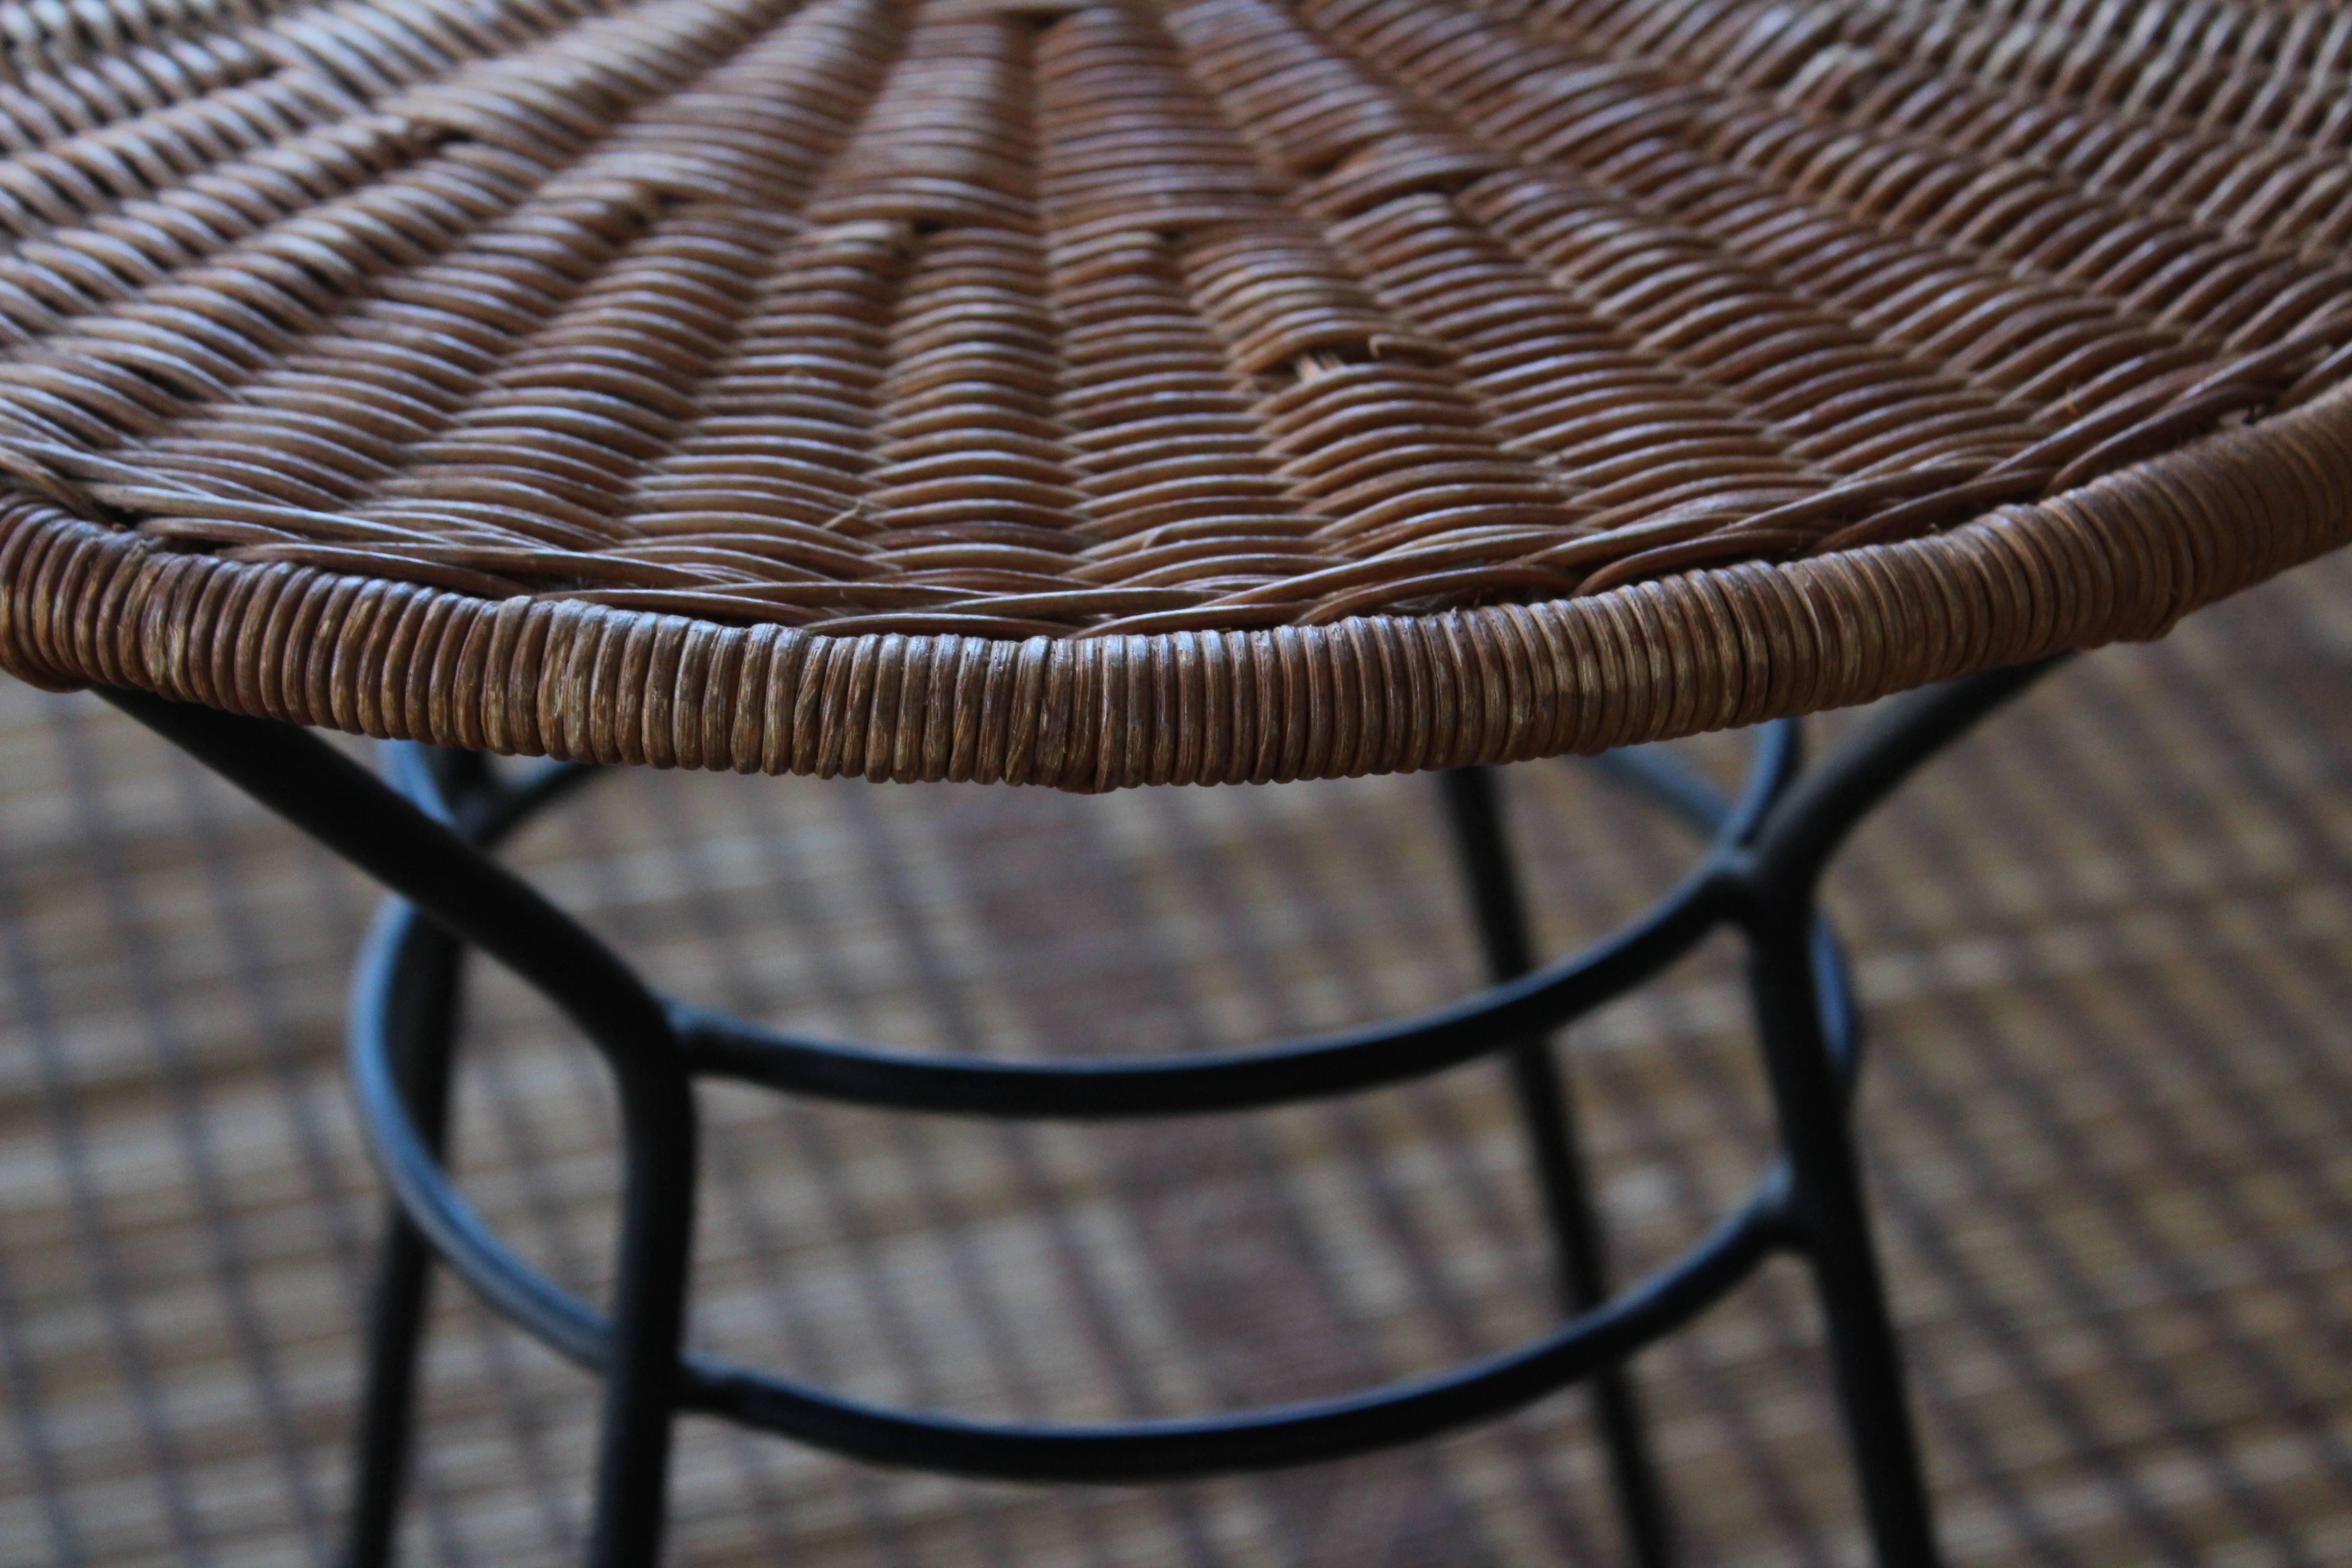 Pair of 1950s side tables with woven rattan/wicker tops and iron bases.